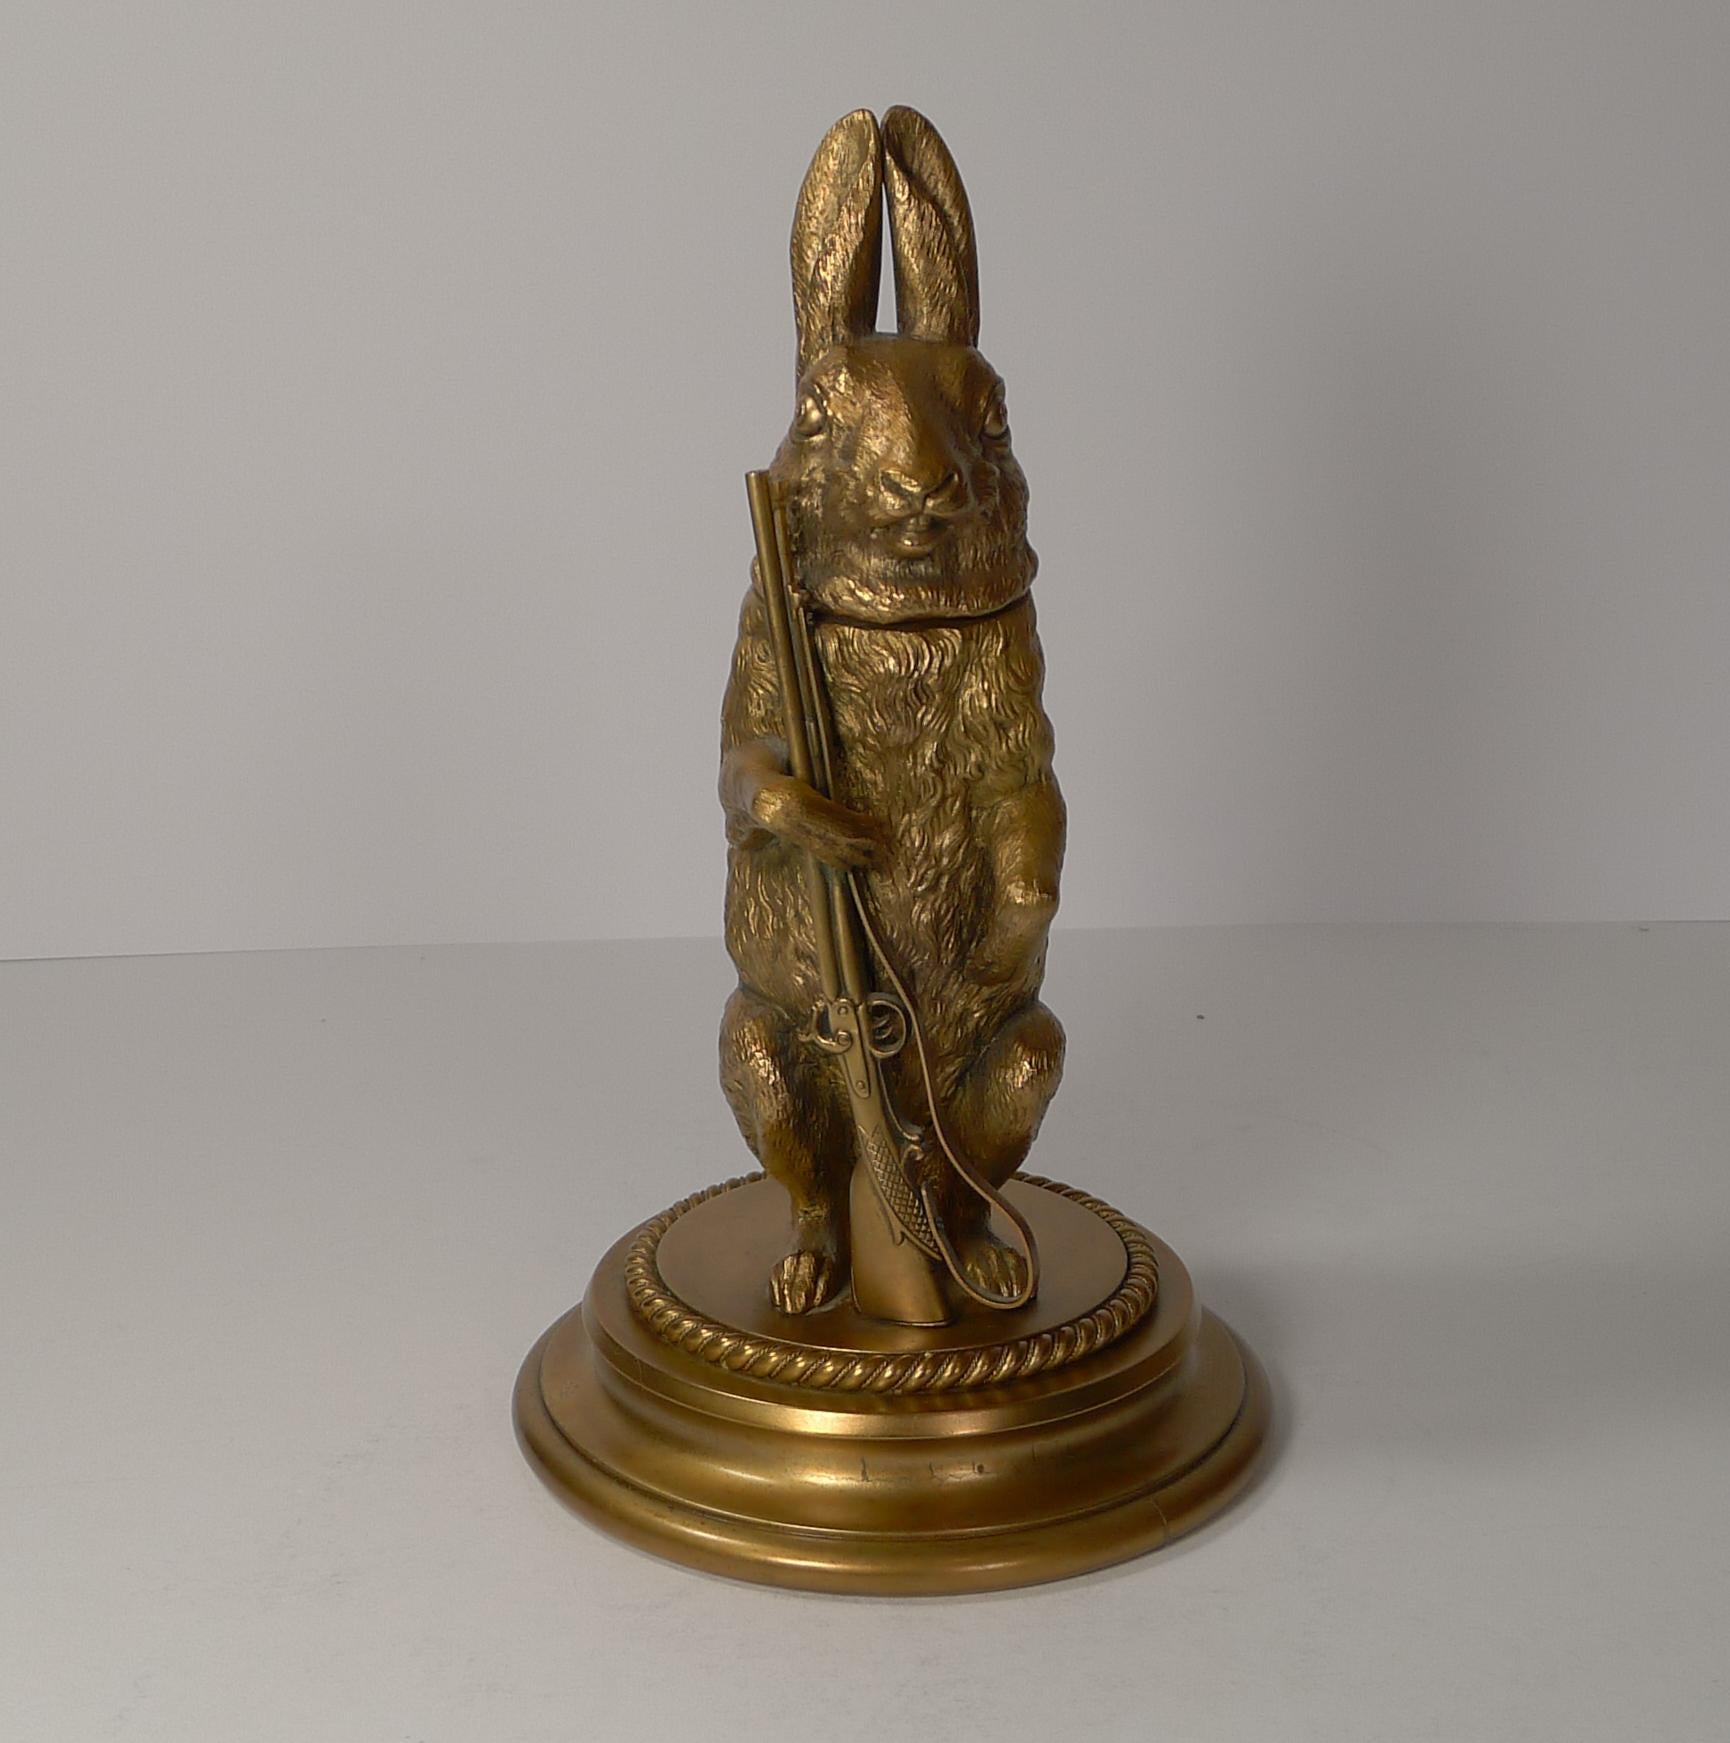 A truly fabulous Victorian novelty inkwell made from solid cast bronze in the form of a hunting Hare holding a rifle, smothered in the original gold with a fabulous antique patina.

The hinged lid opens to reveal the ink chamber within,

Dating